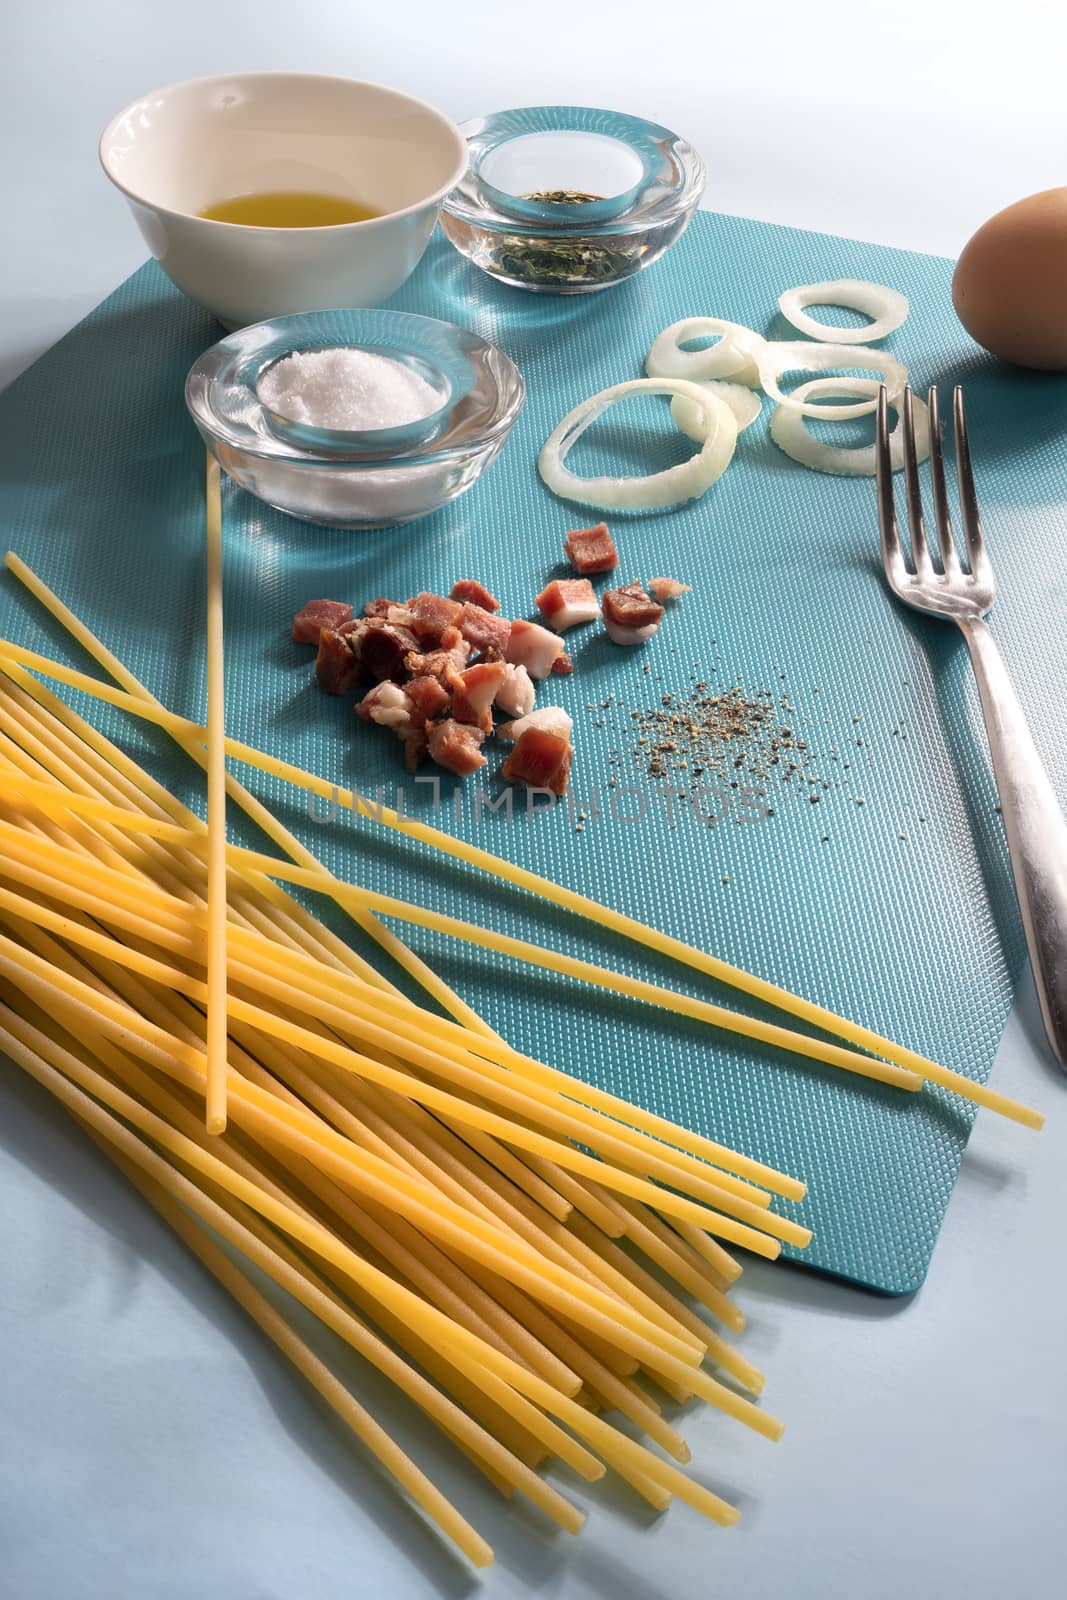 ingredients for the preparation of spaghetti carbonara